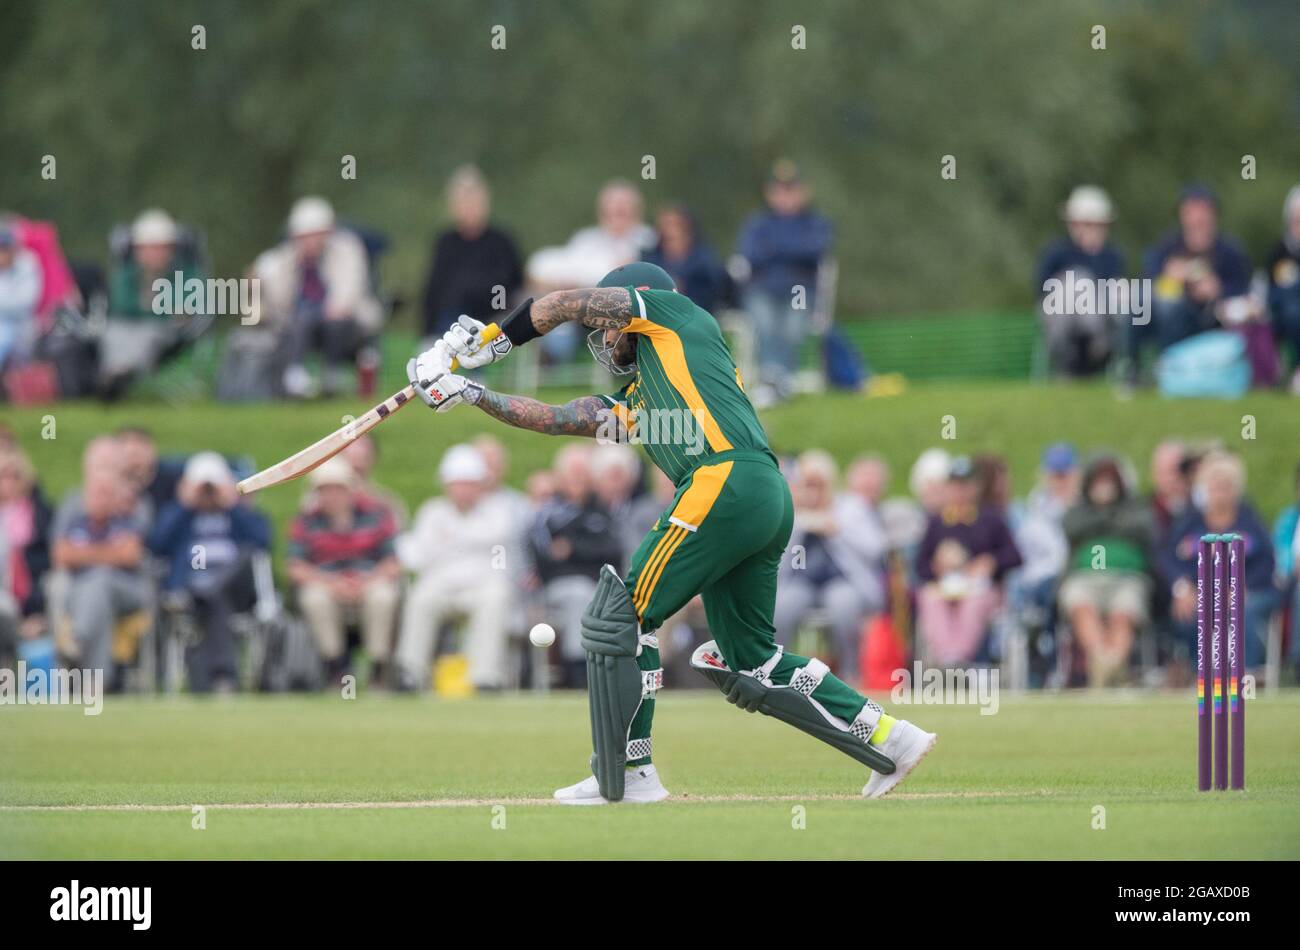 John Fretwell Sporting Complex, Mansfield, Nottinghamshire, UK. 1st August 2021. Group B Nottinghamshire Outlaws take on Leicestershire Foxes at the John Fretwell Sporting Complex in the Royal London One-day Cup Credit: Alan Beastall/Alamy Live News. Stock Photo